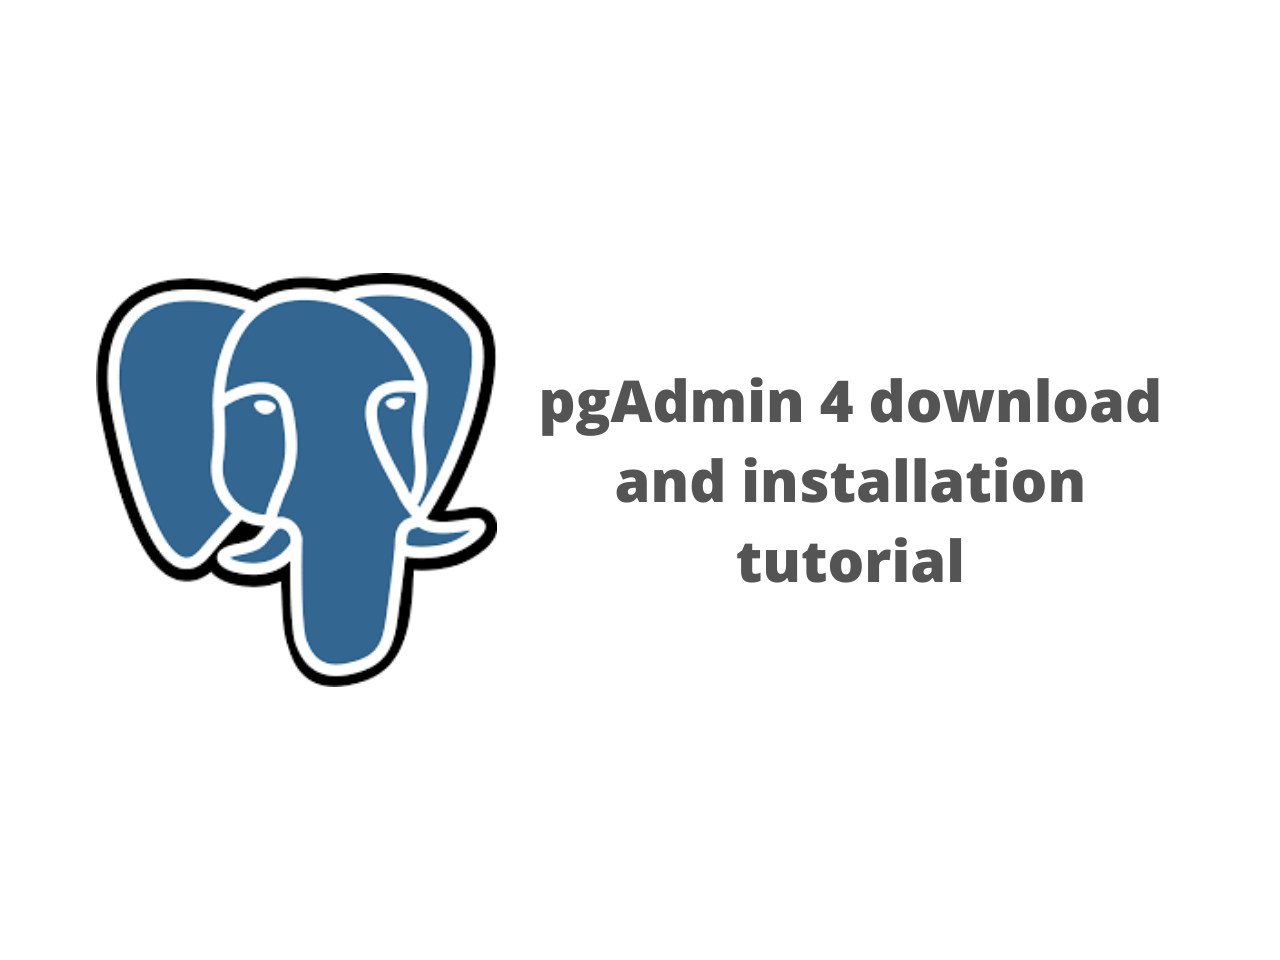 pgAdmin 4 download and installation tutorial for Windows 10 Answersjet